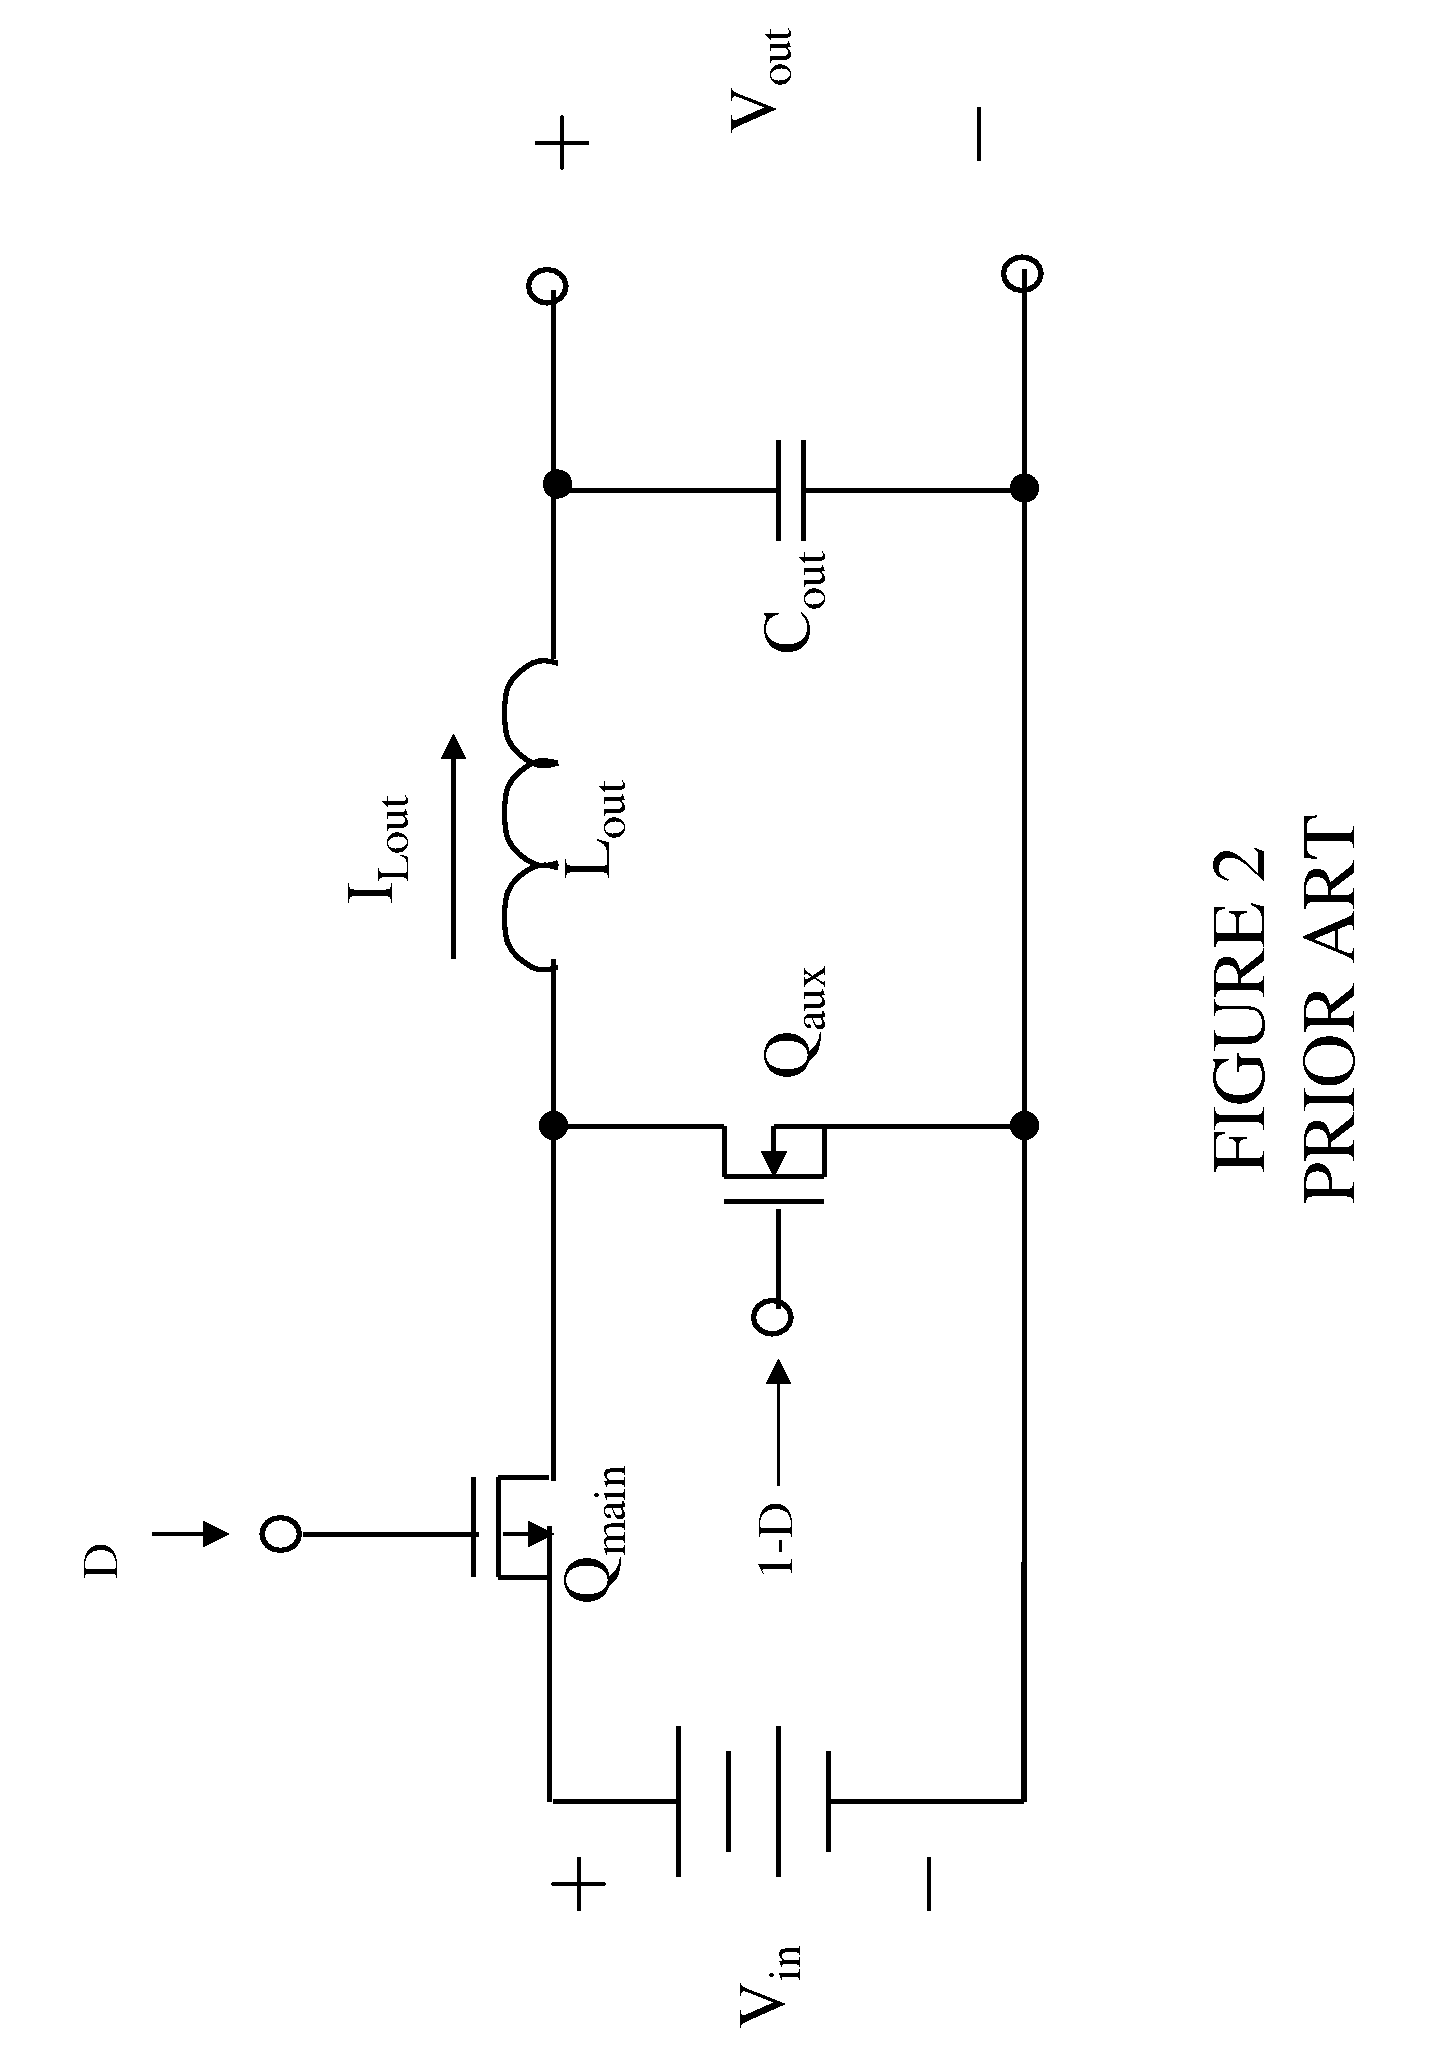 Power System with Power Converters Having an Adaptive Controller